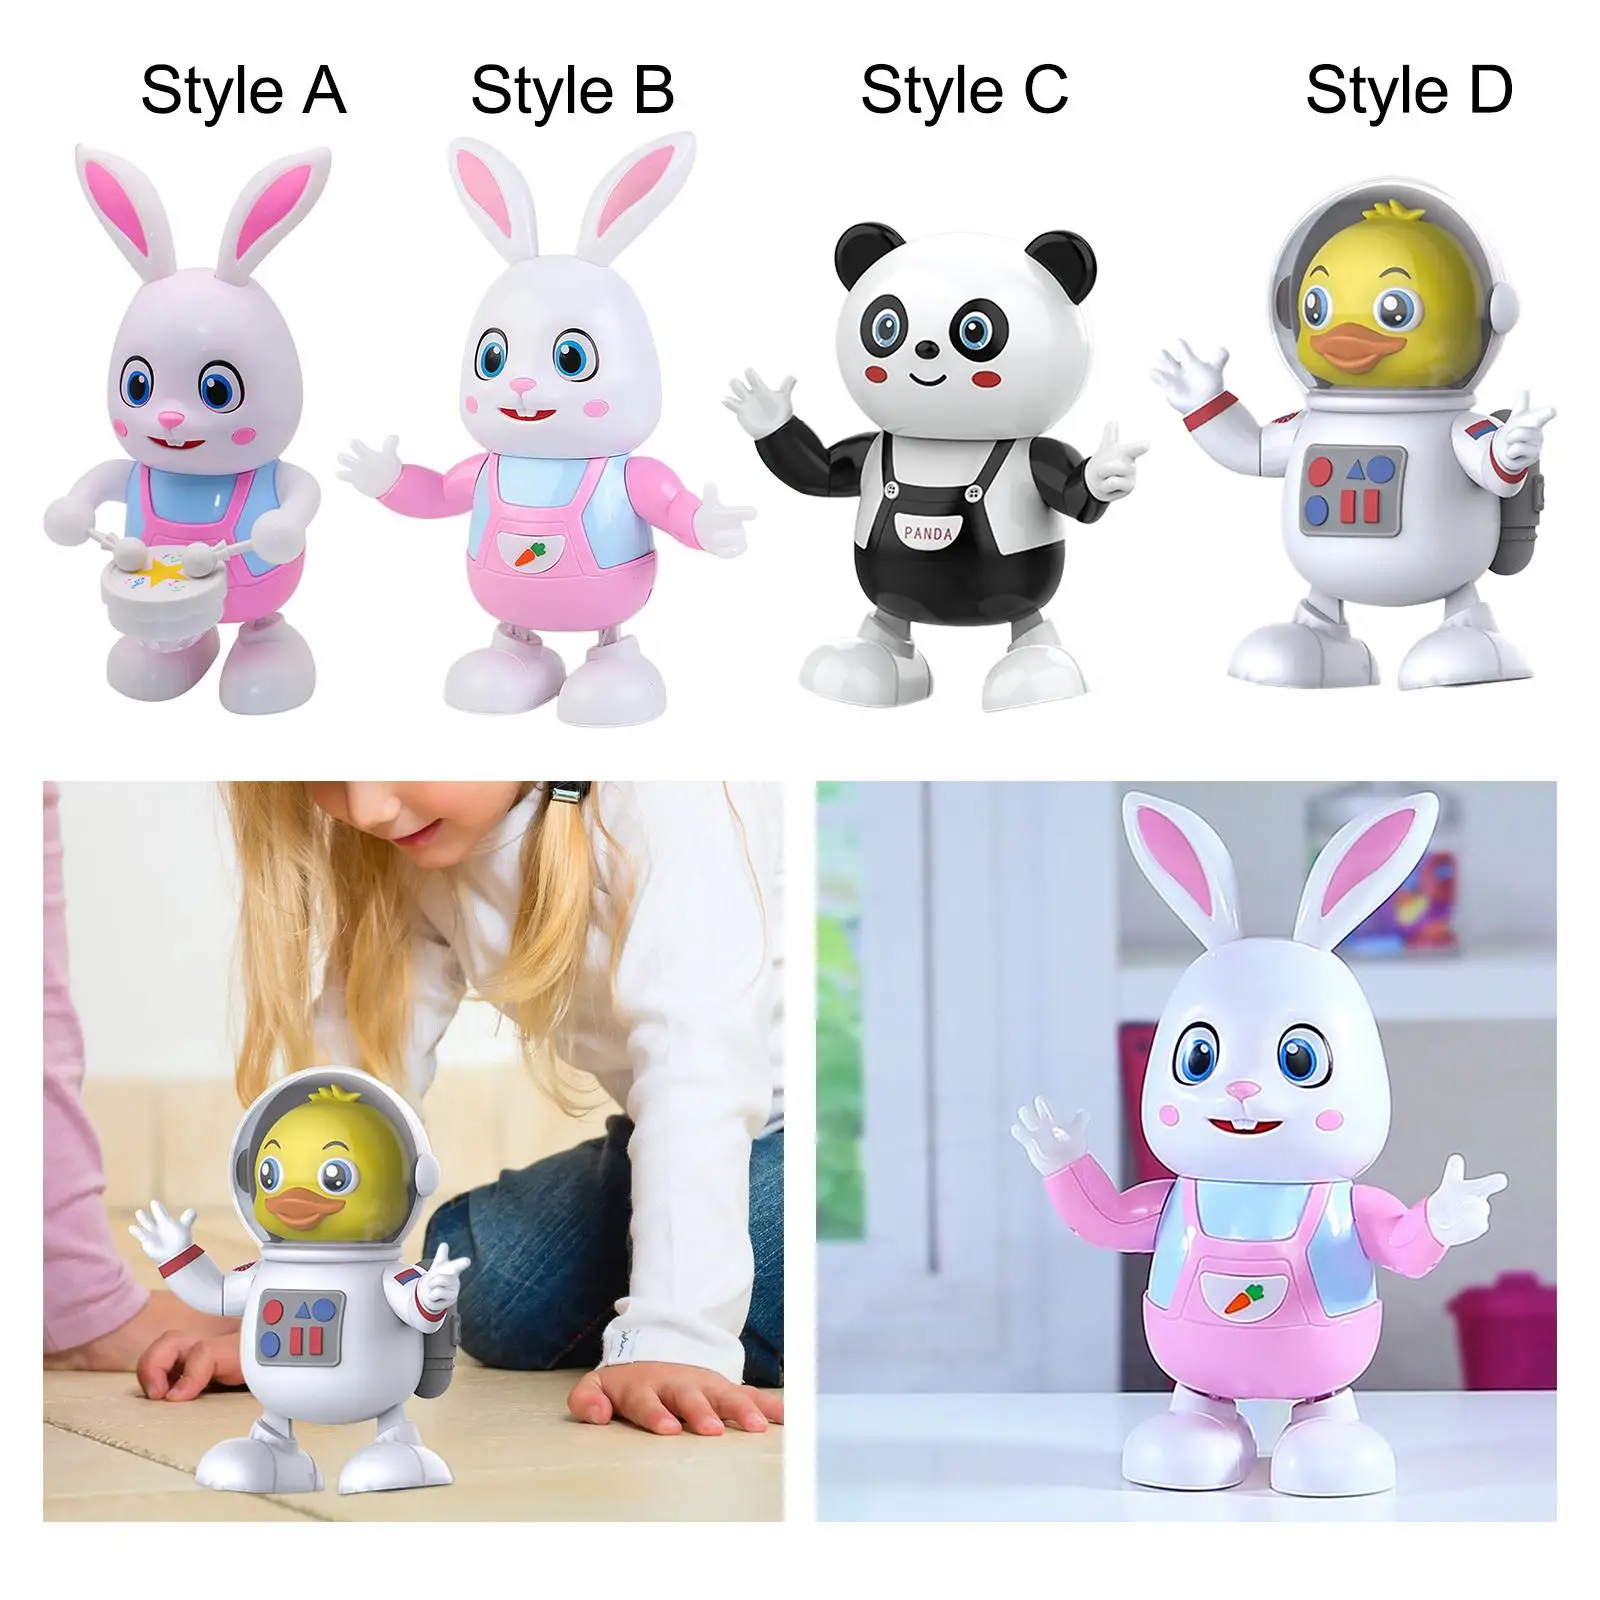 Light up Toy Funny Cute Learning Dancing Toy Baby Musical Toy Music and Lights Toy for Children 3+ Year Old Toddlers Girls Kids